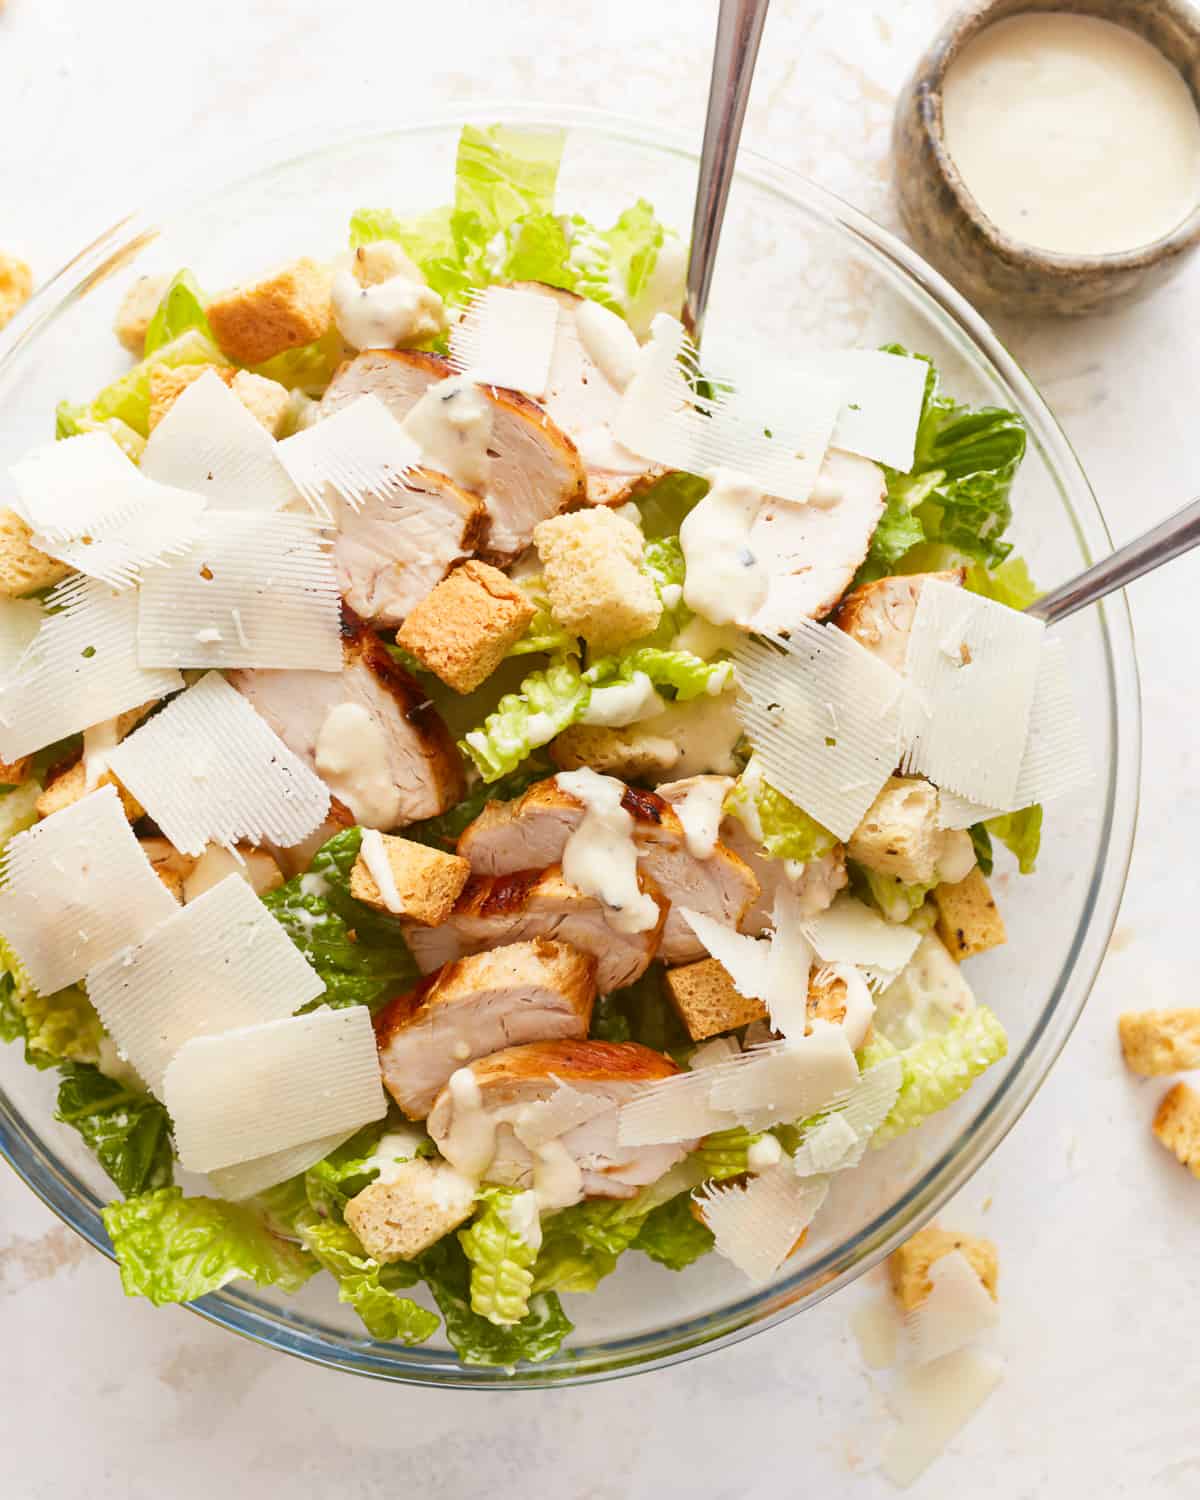 A bowl of chicken caesar salad with croutons and parmesan.